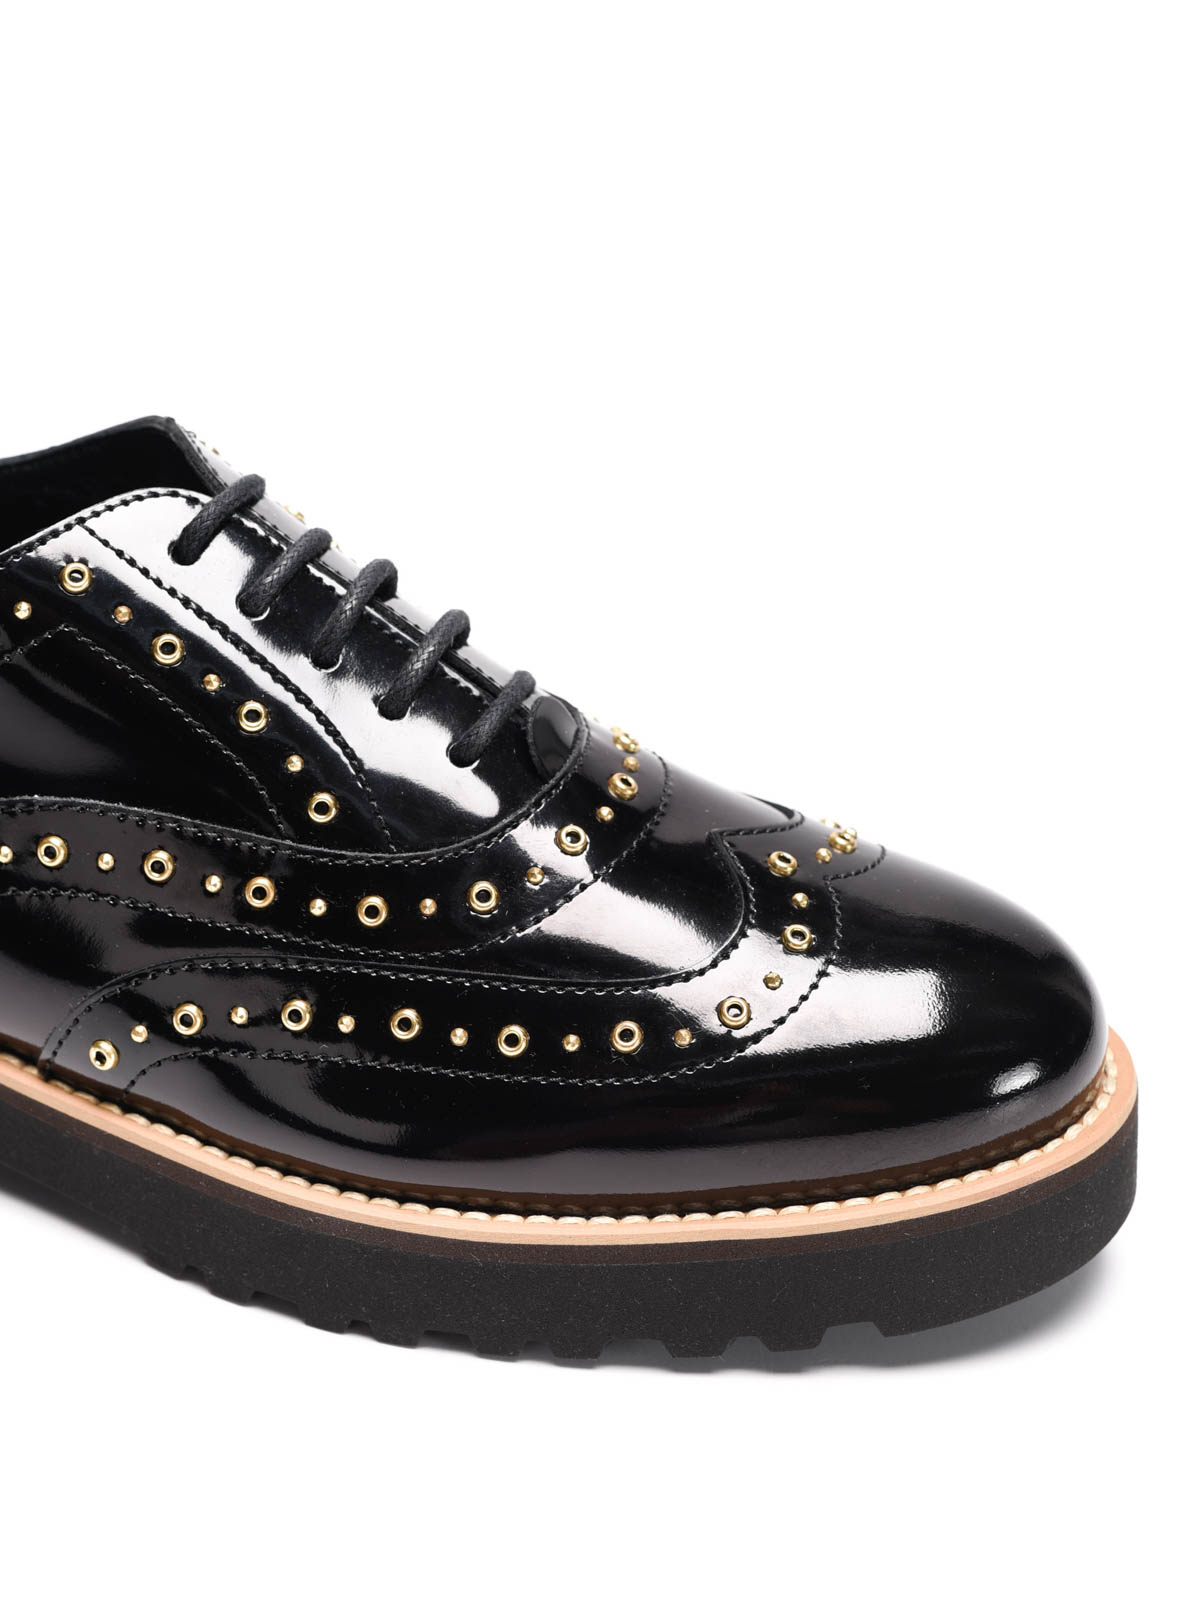 Hogan - H259 Route studded Oxford shoes 